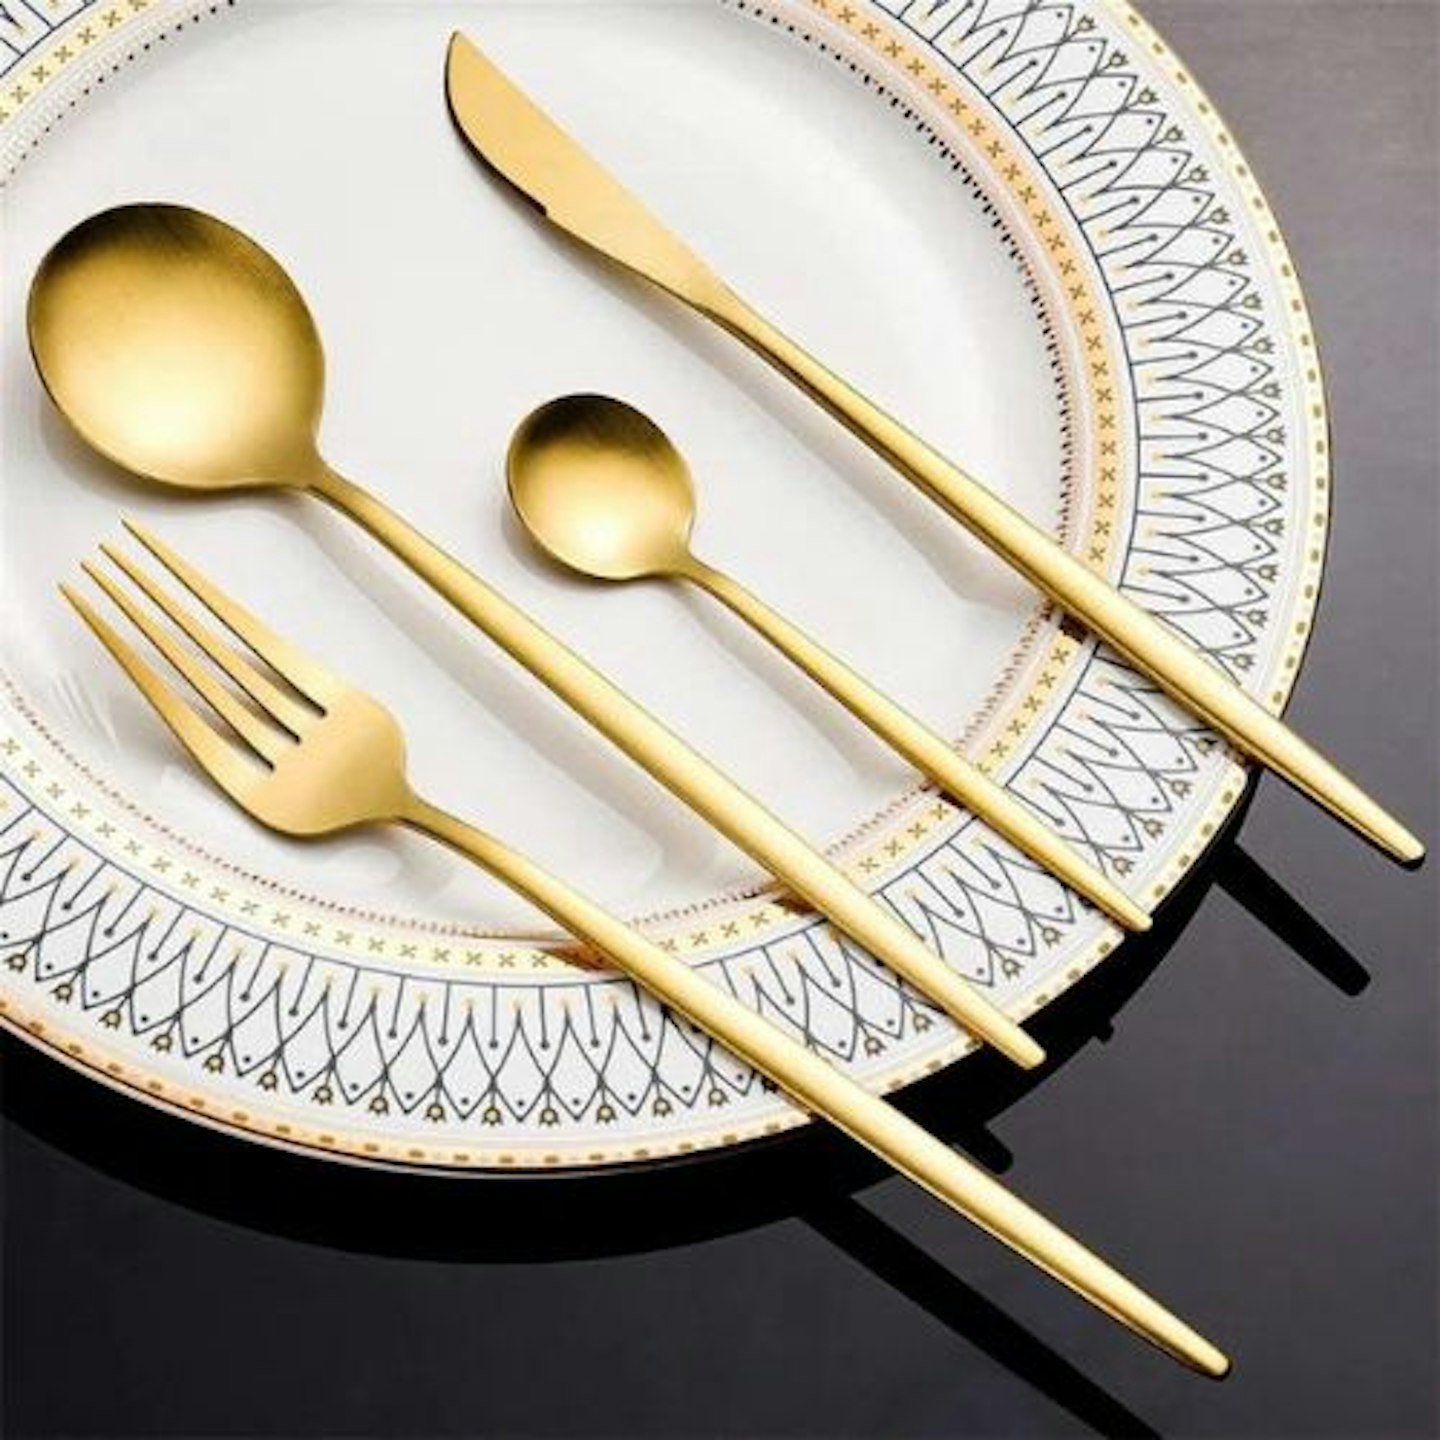 Babisill 24 Piece Stainless Steel Cutlery Set